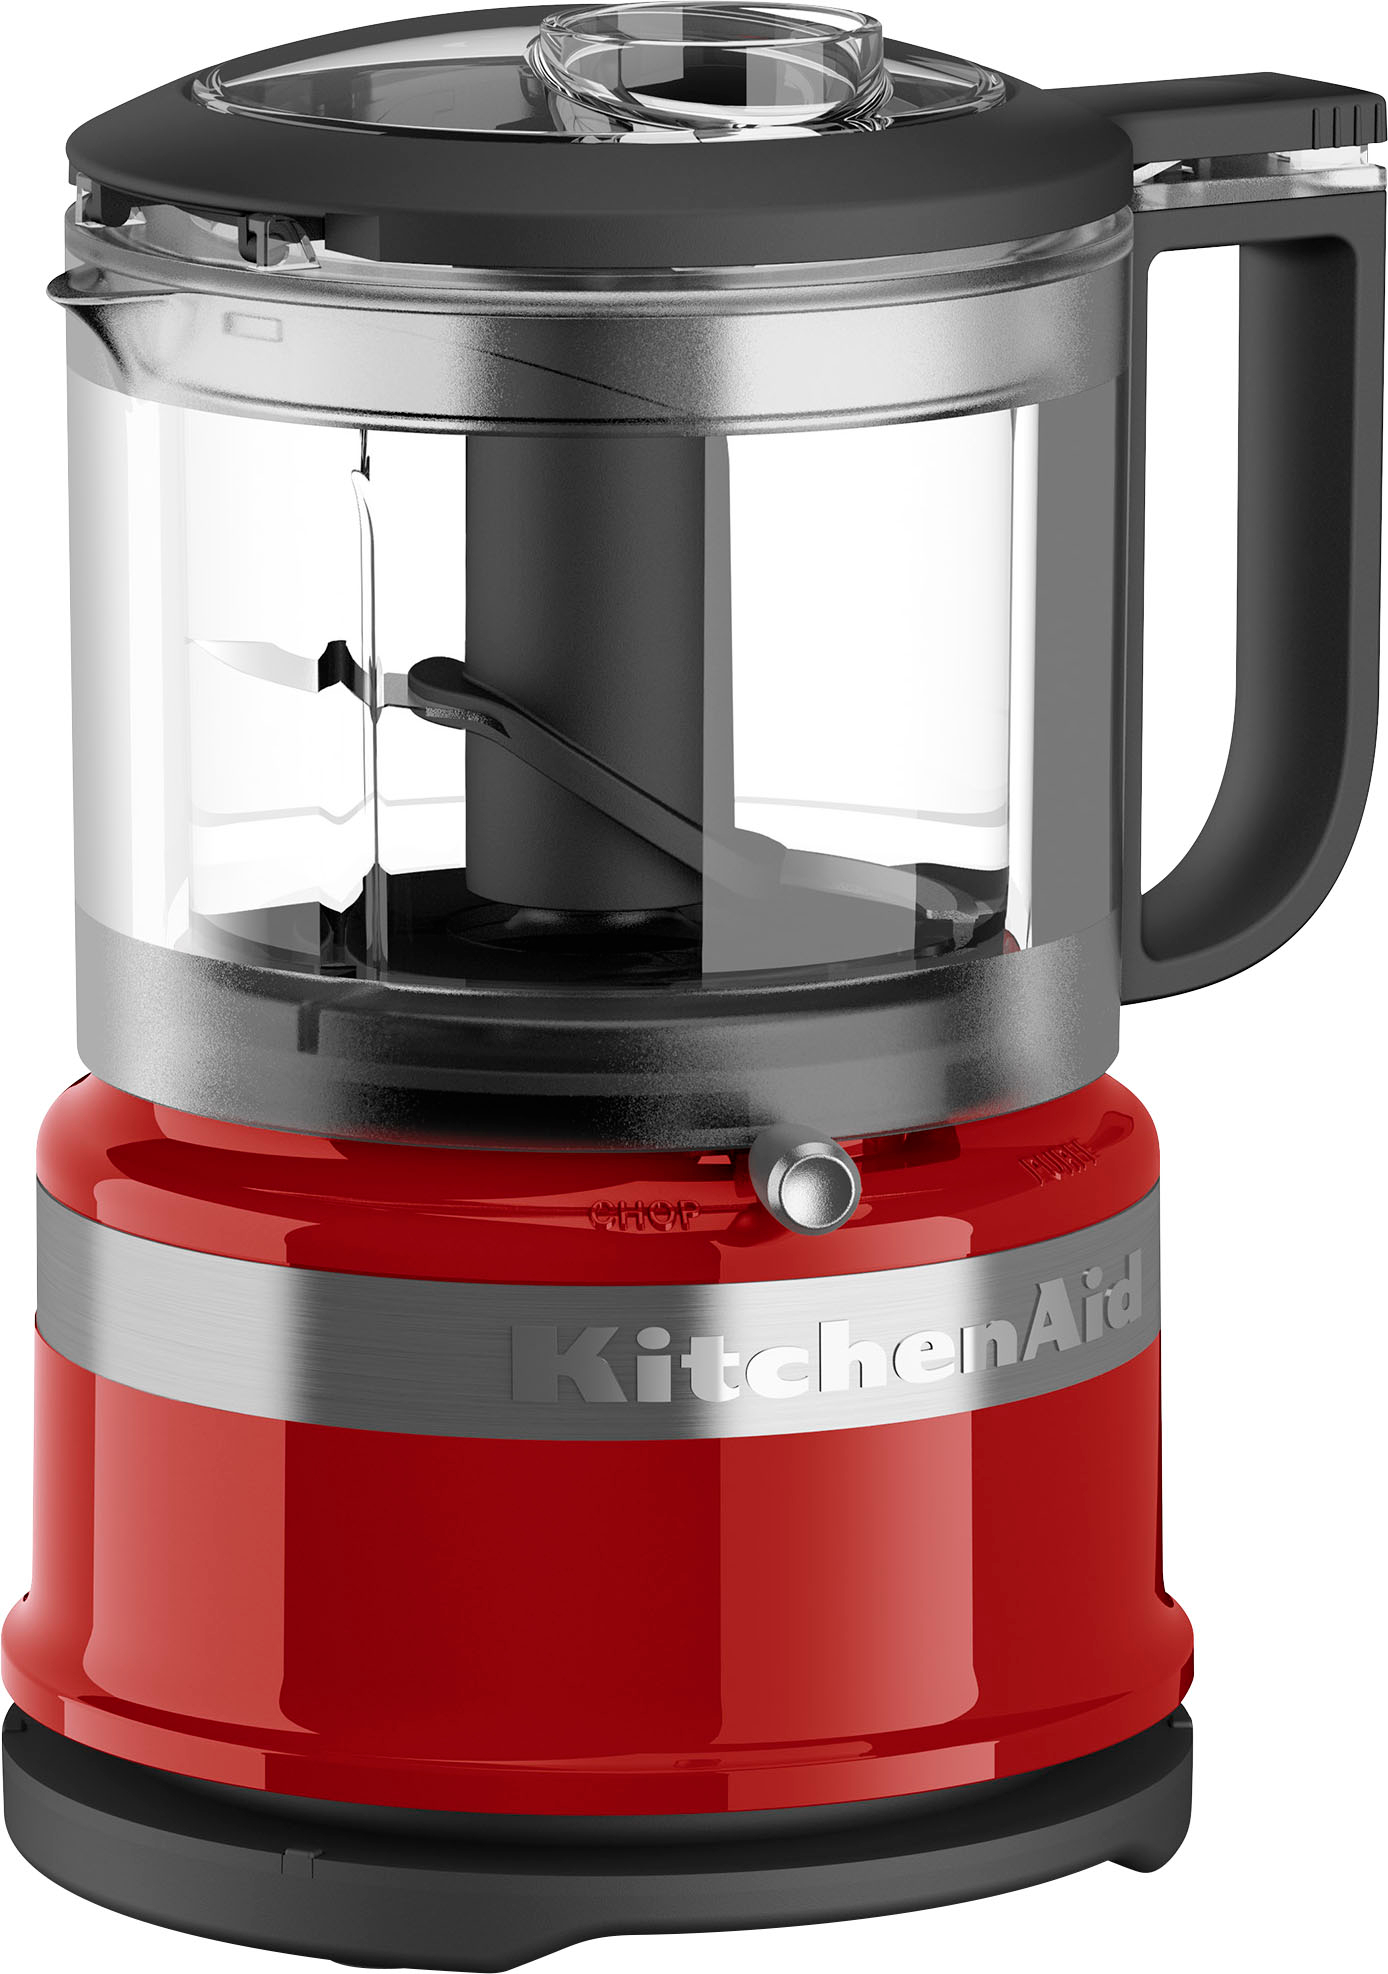 KitchenAid 5 Cup Cordless Food Chopper Empire Red